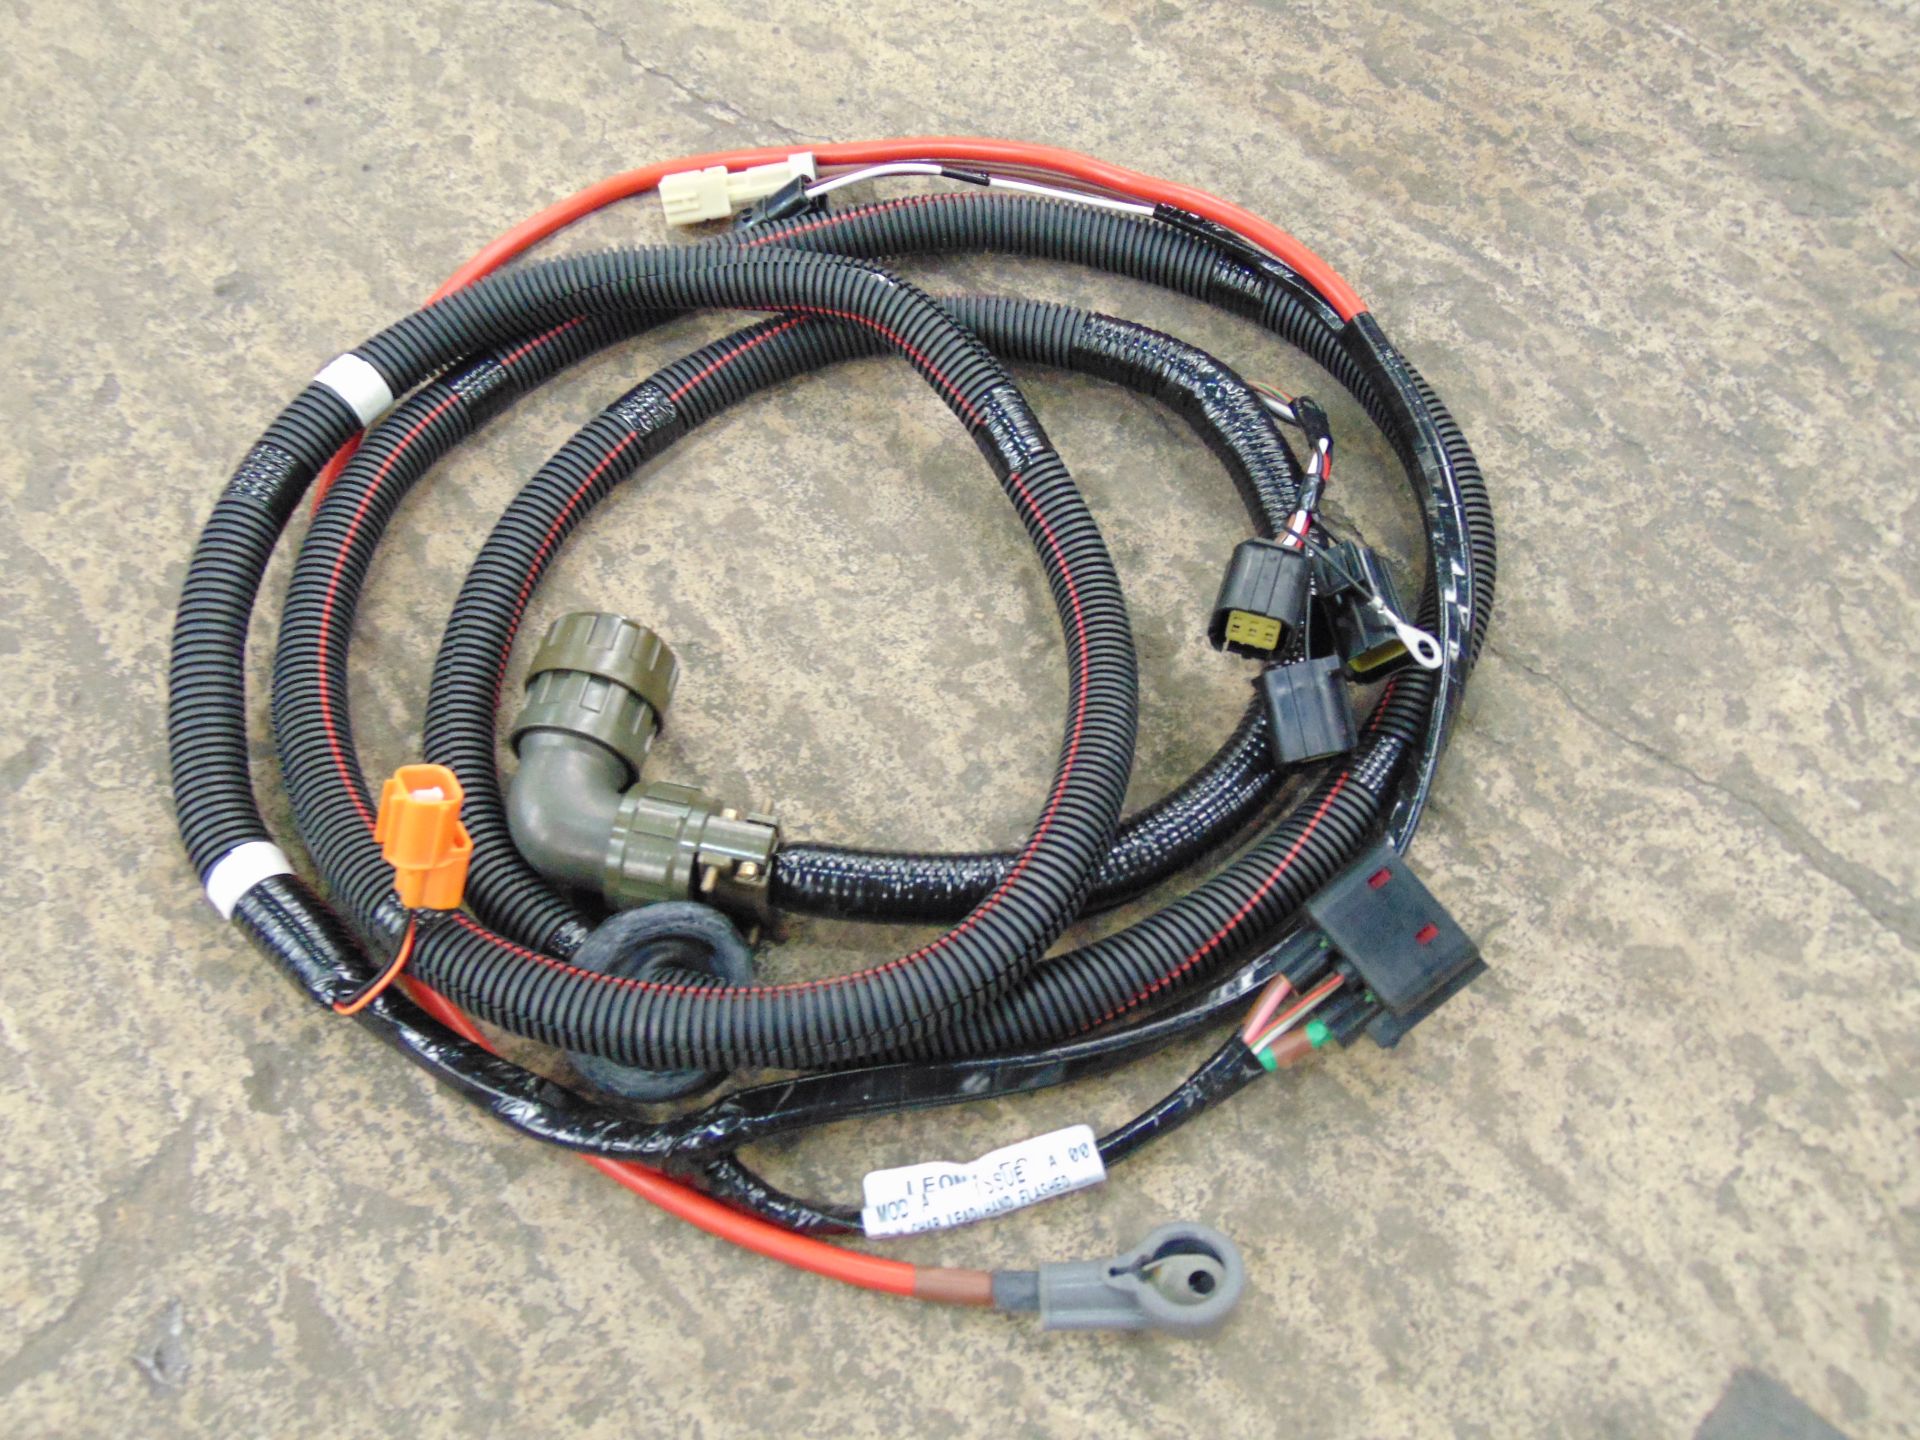 Land Rover Branched Wiring Harnesses P/No YMN102200 - Image 2 of 9